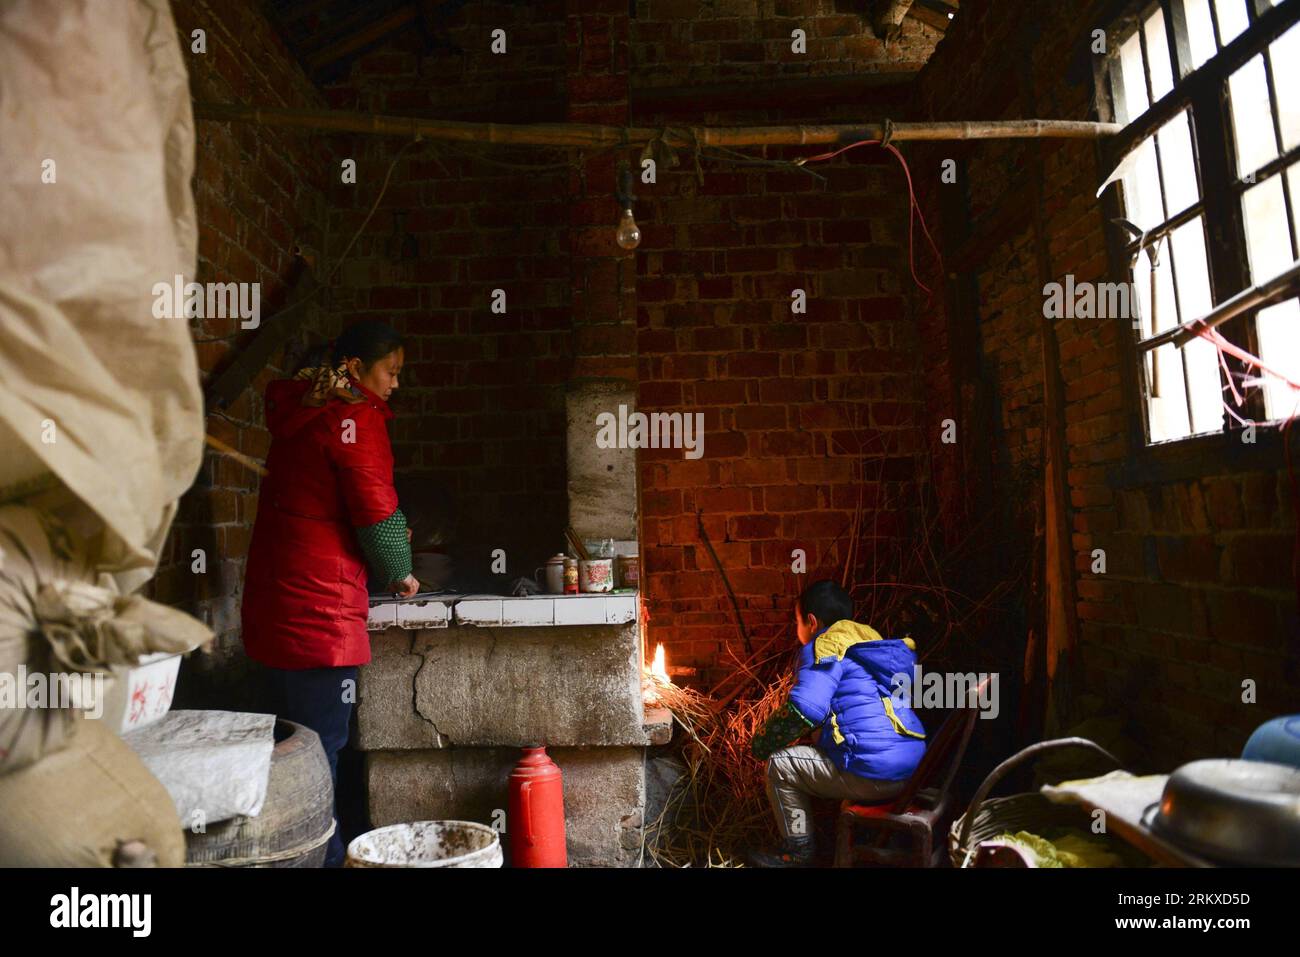 Bi Dahua, a young boy suffering from leukemia, helps his mother light a fire at home in Dingyuan Township of Luoshan County, central China s Henan Province, Dec. 20, 2012. Bi was diagnosed with leukemia in 2010, and has spent over 180,000 yuan (28,872 U.S. dollars) for medical treatment. (Xinhua/Jin Liangkuai) (ry) CHINA-HENAN-LEUKEMIA-CHILDREN (CN) PUBLICATIONxNOTxINxCHN   Bi Dahua a Young Boy Suffering from Leukemia Helps His Mother Light a Fire AT Home in Ding Yuan Township of  County Central China S Henan Province DEC 20 2012 Bi what diagnosed With Leukemia in 2010 and has spent Over 180 0 Stock Photo